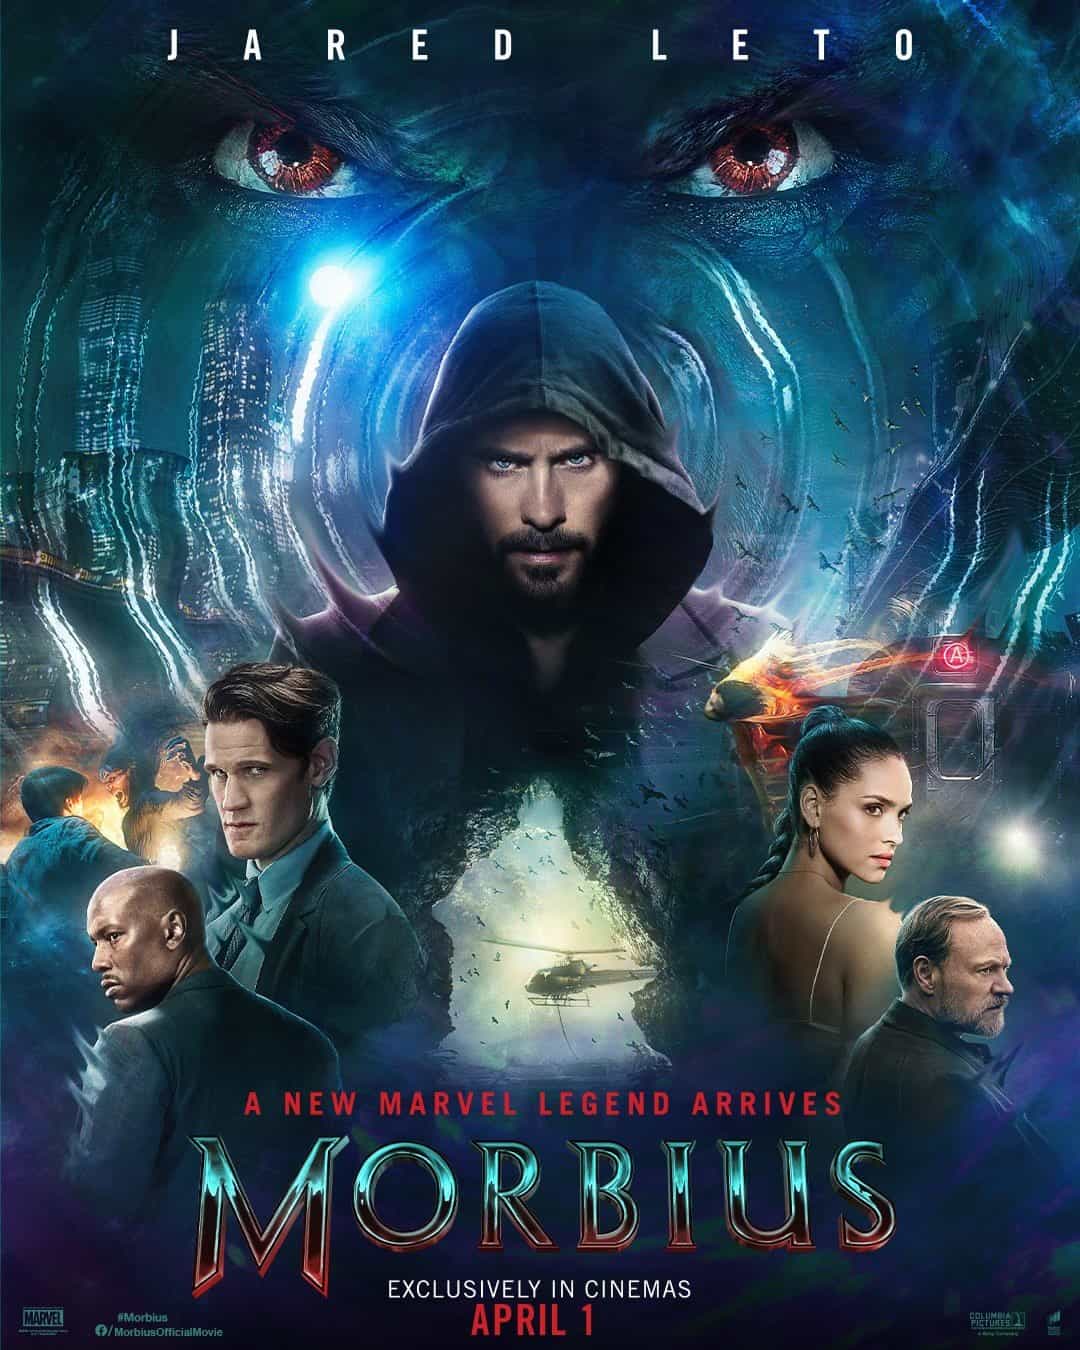 New poster released for Morbius starring Jared Leto - movie UK release date 1st April 2022 #morbius